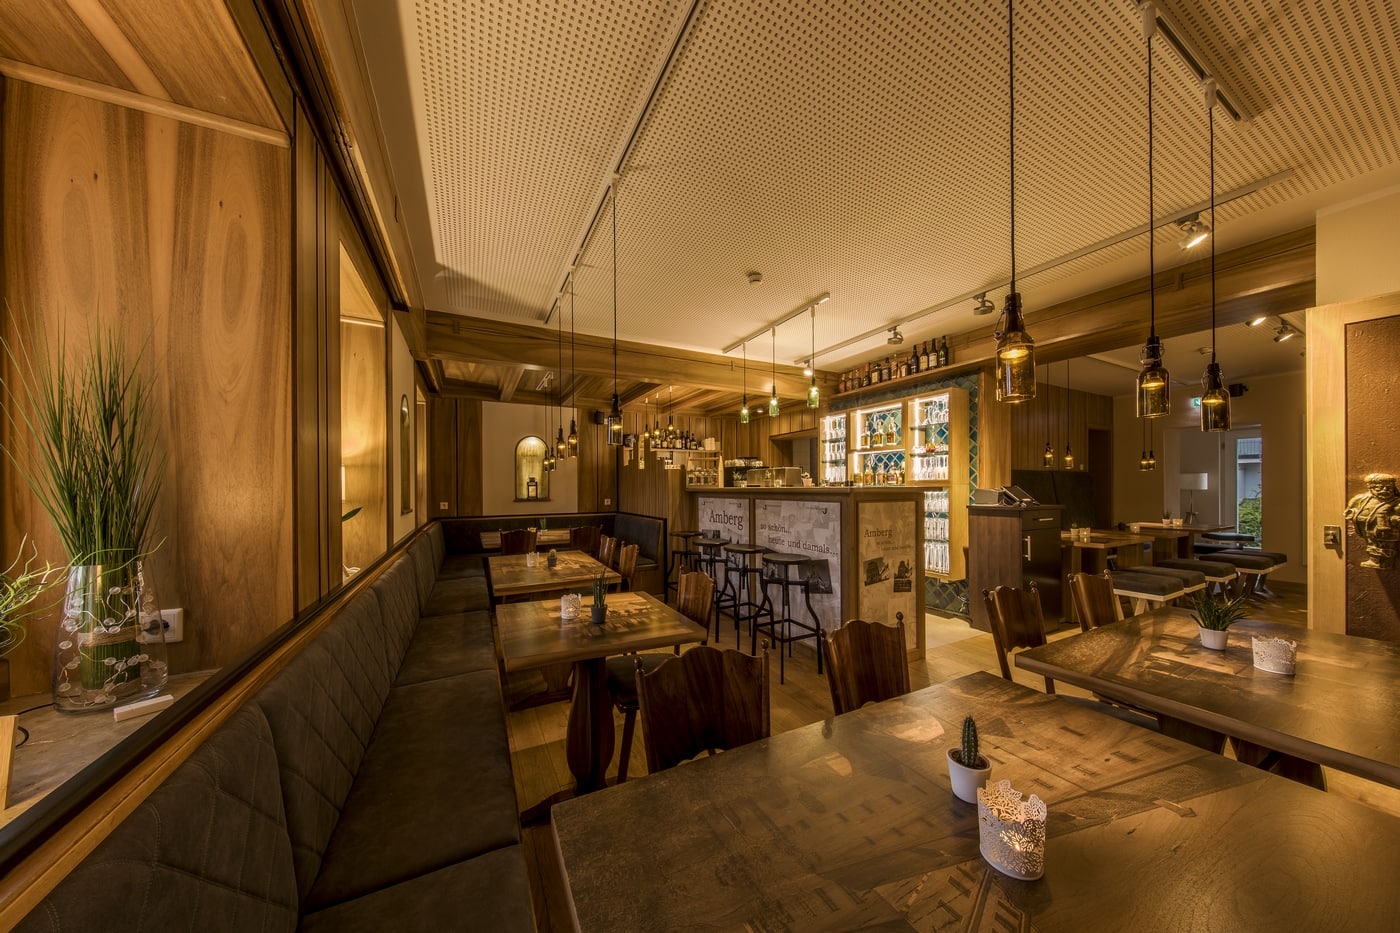 Our bar-bistro-wine bar Atelier Teufelsbäck offers coziness in a stylish atmosphere.